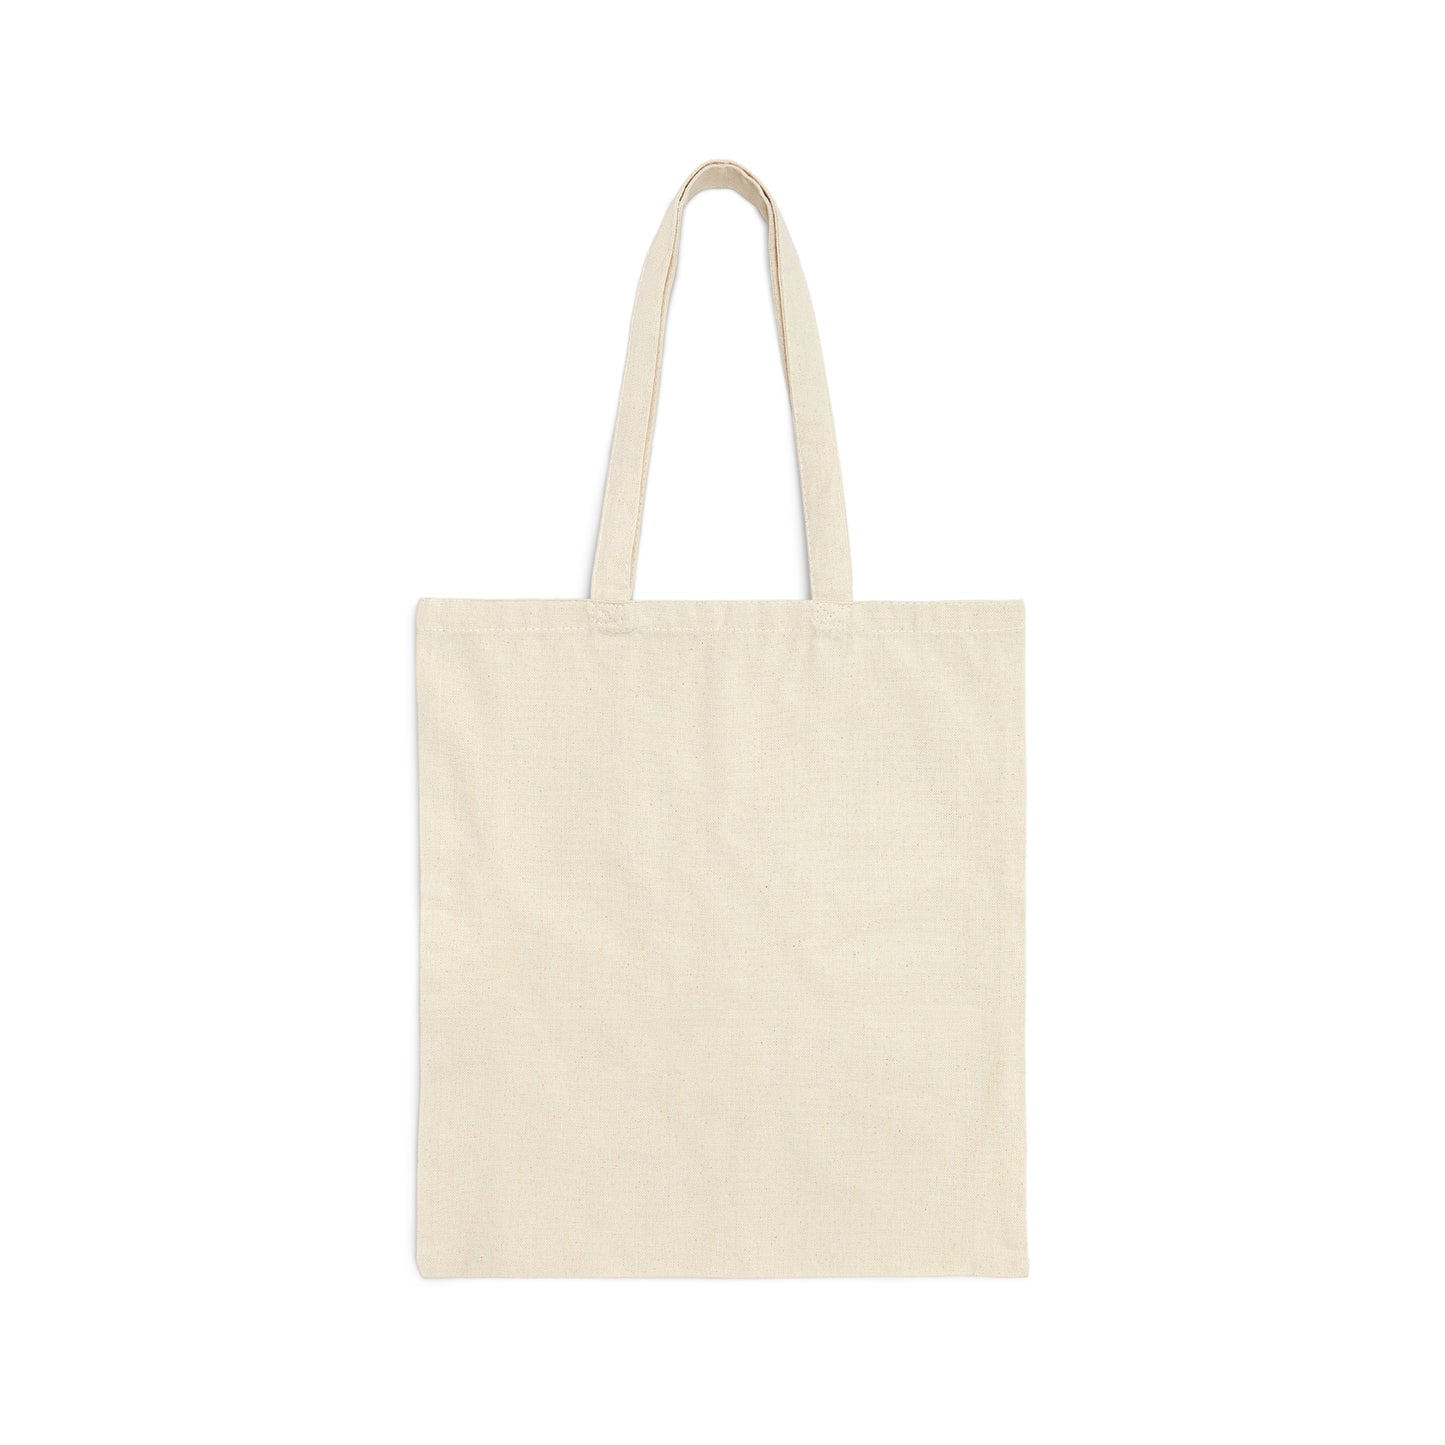 Roses are Red Programming IT for Computer Security Hackers Canvas Shopping Cotton Tote Bag